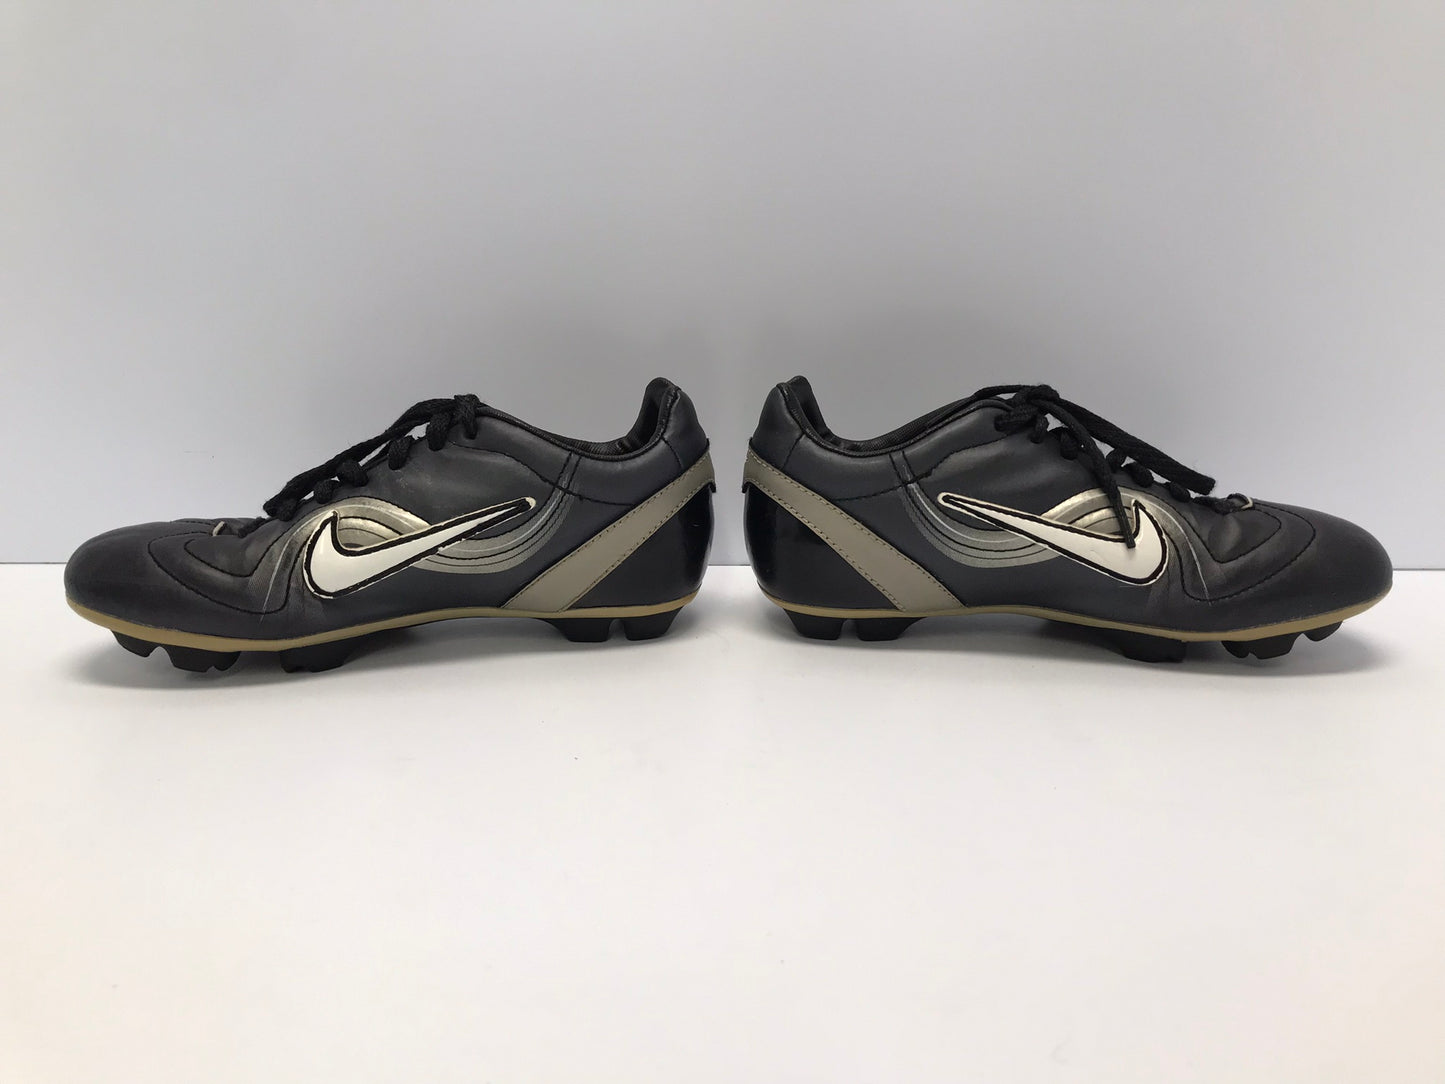 Soccer Shoes Cleats Child Size 1 Nike Black Grey